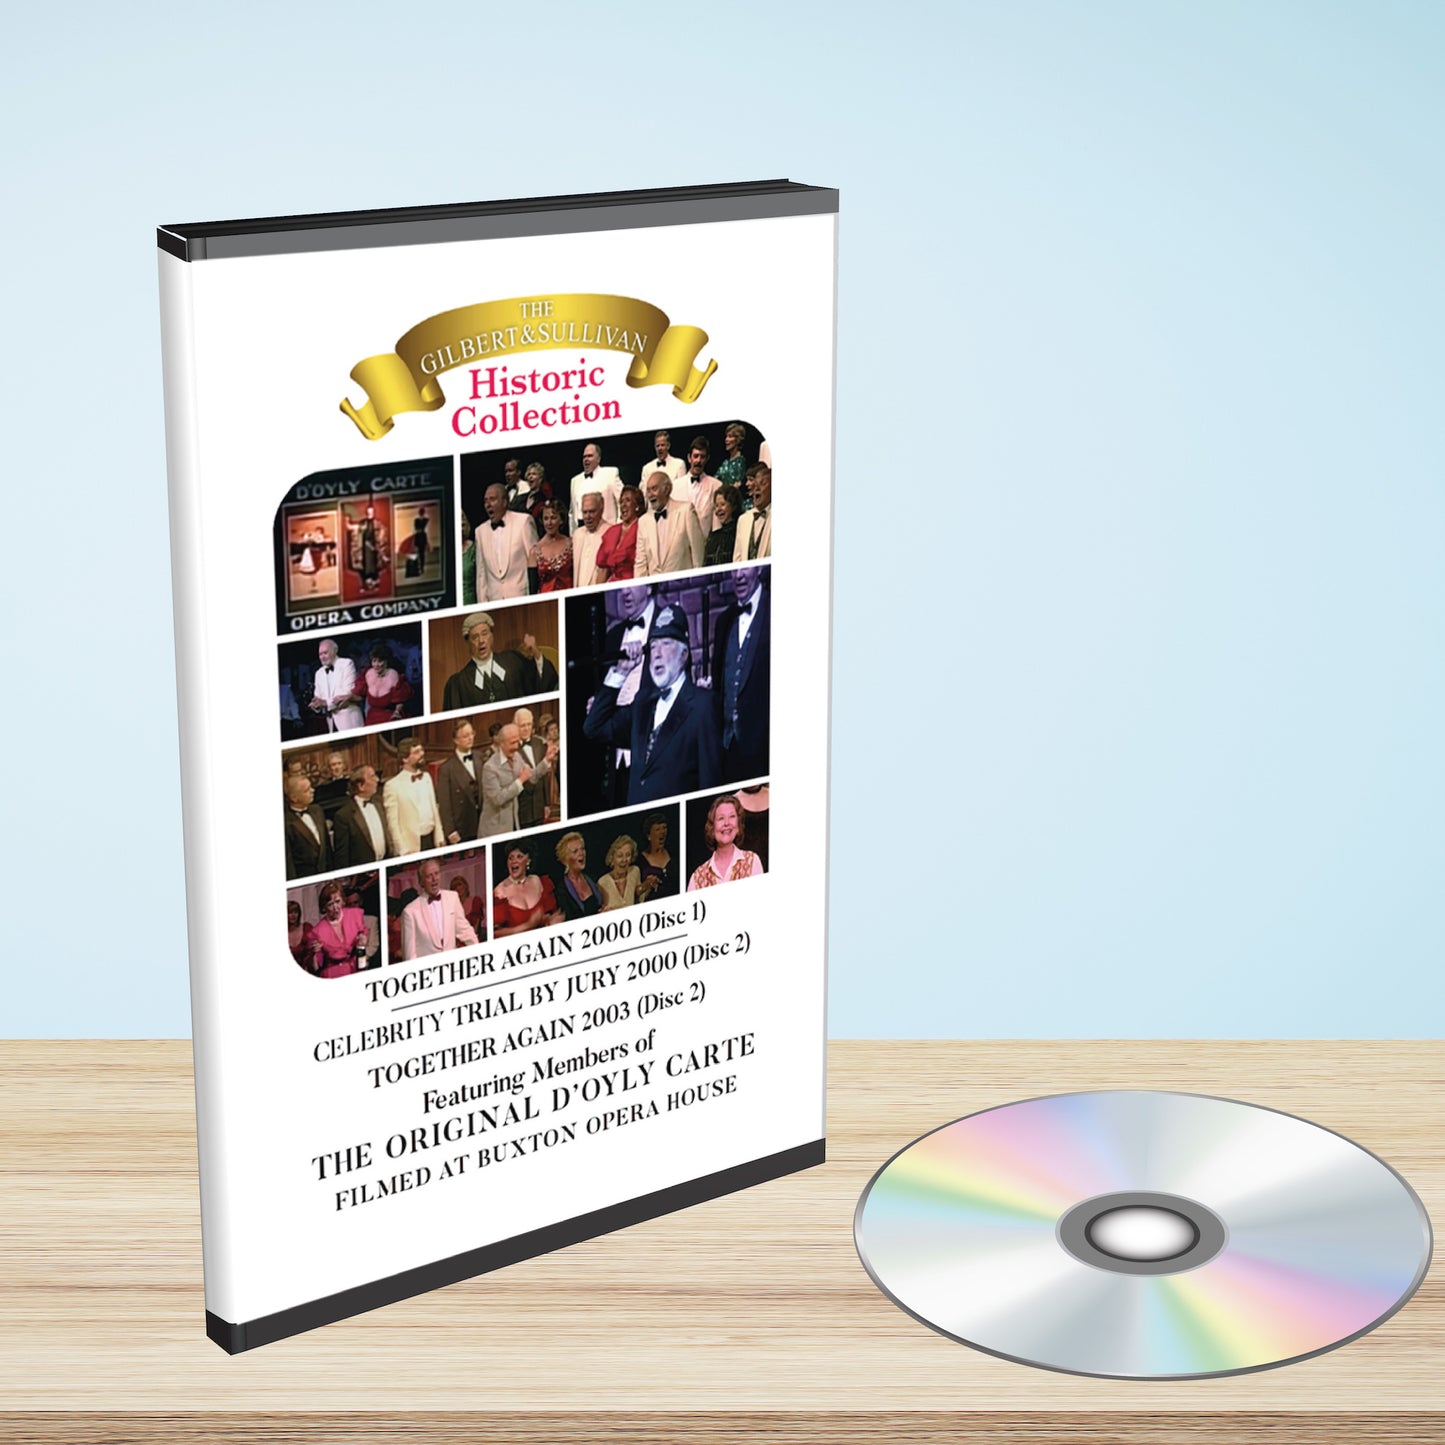 Together Again 2000, Celebrity Trial by Jury & Together Again 2003 DVD Box Set